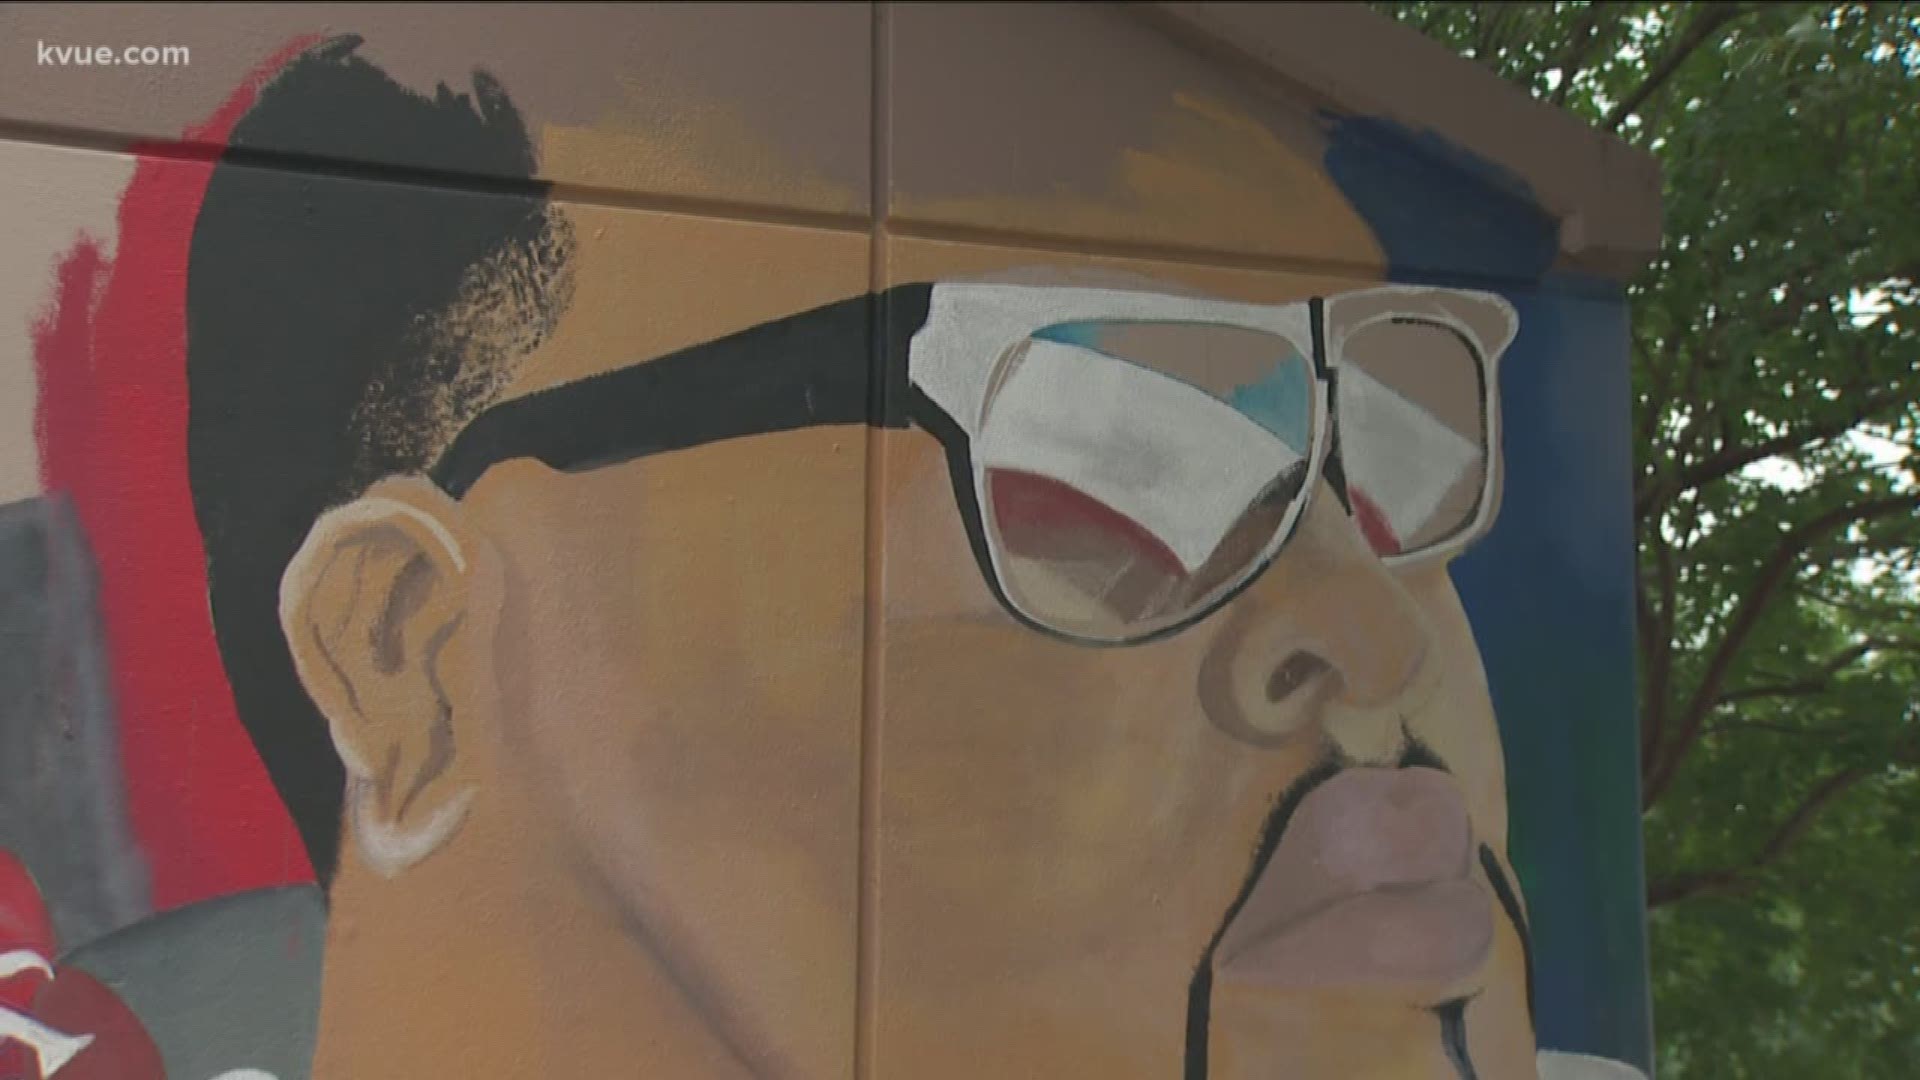 A petition has been started to save a mural that was made in honor of the man killed in the Givens Park shooting in April.